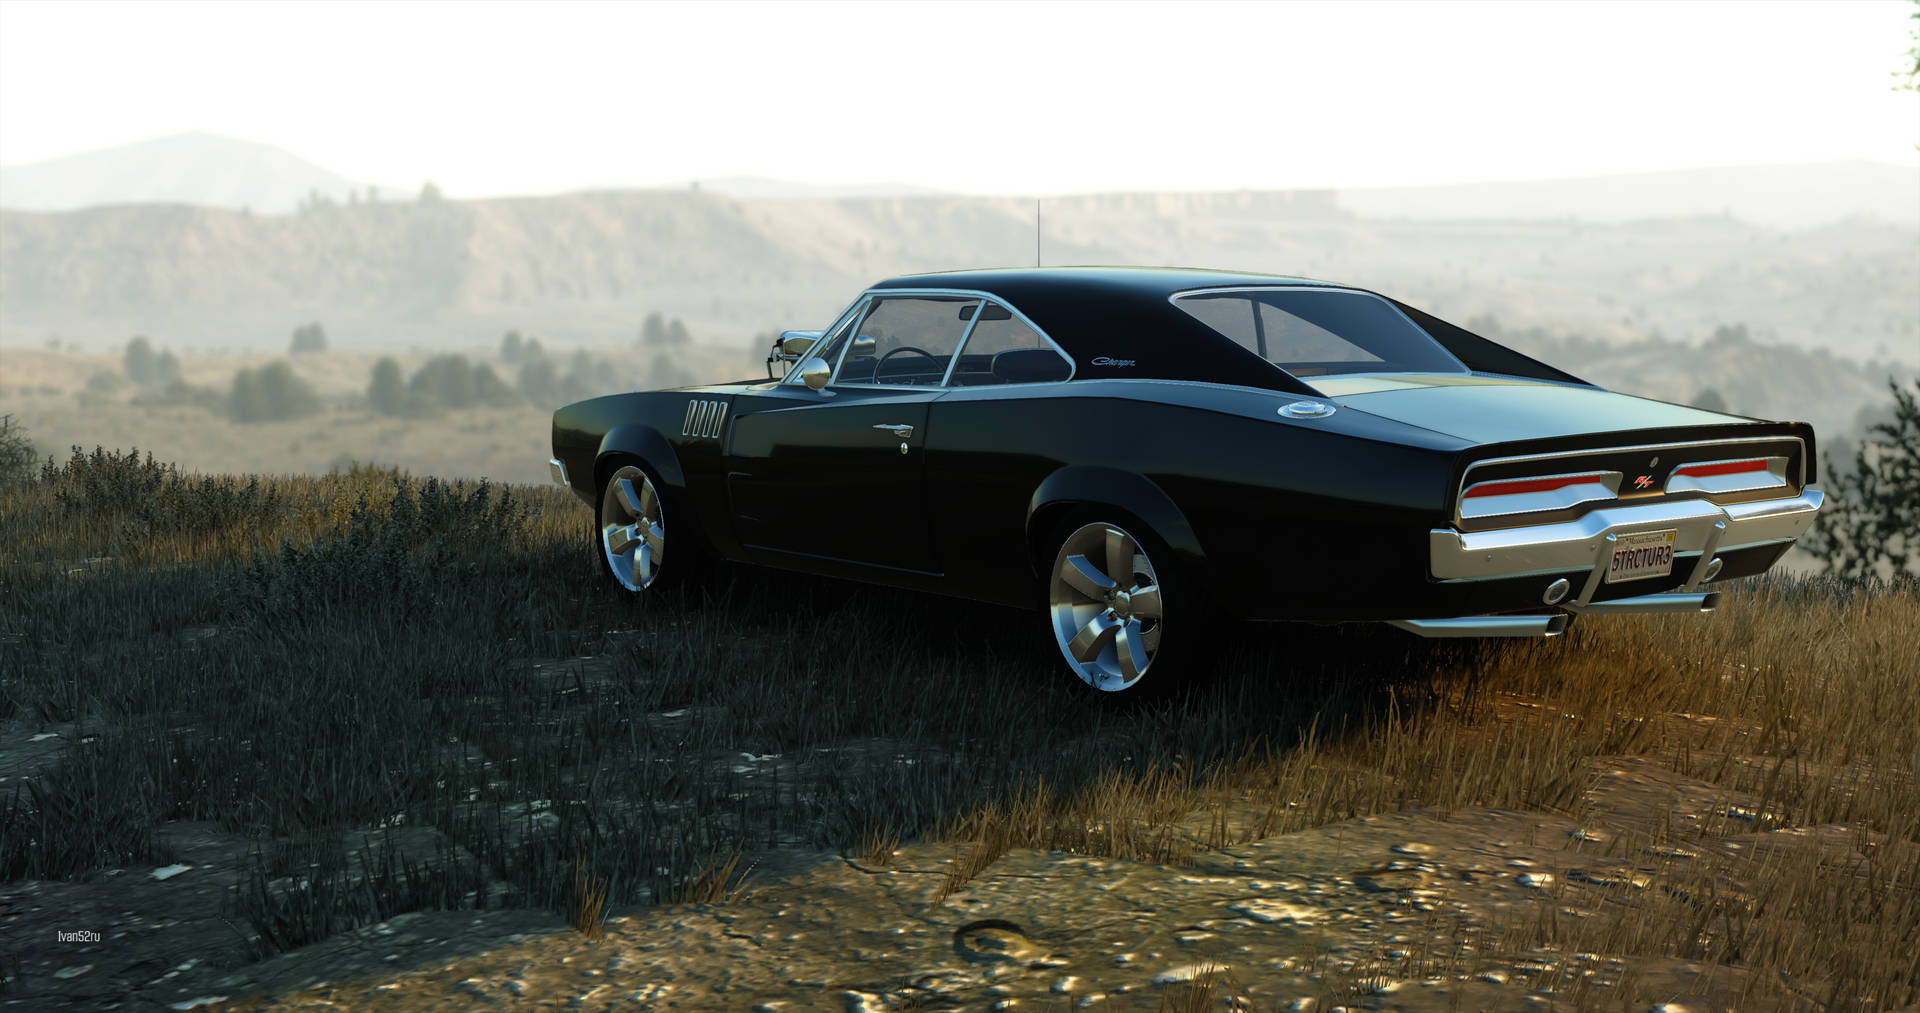 Grand Theft Auto V Black Muscle Car Background